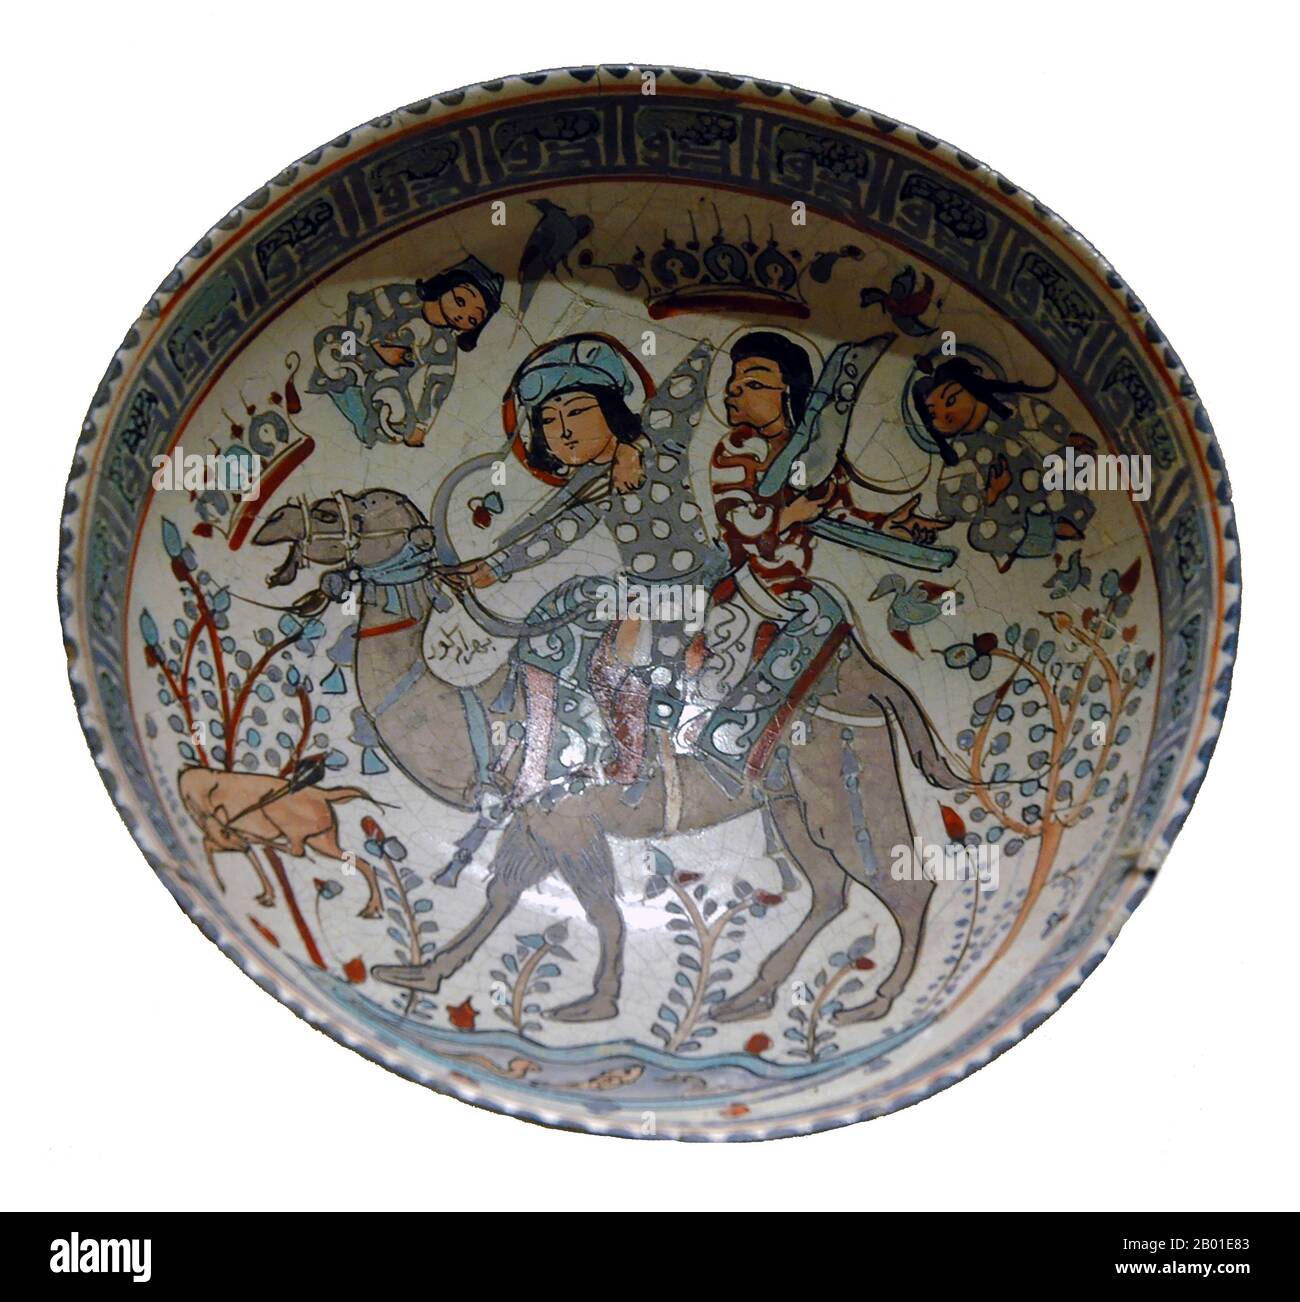 Iran/Persia: Bowl depicting Bahram Gur (400-438), hero of the Shahnameh (Book of Kings), and the harpist Azada, riding a Bactrian camel while hunting. Plate painting, 12th-13th century.  Bahram V was the fourteenth Sassanid Shahanshah (King of Kings) of Persia (r. 421-438). Also called Bahram Gur or Bahramgur, he was a son of Yazdegerd I, after whose sudden death (or assassination) he gained the crown against the opposition of the grandees by the help of Mundhir, the Arab dynast of al-Hirah.  Bahram Gur is a great favourite in Persian literature and poetry, with numerous legends to his name. Stock Photo